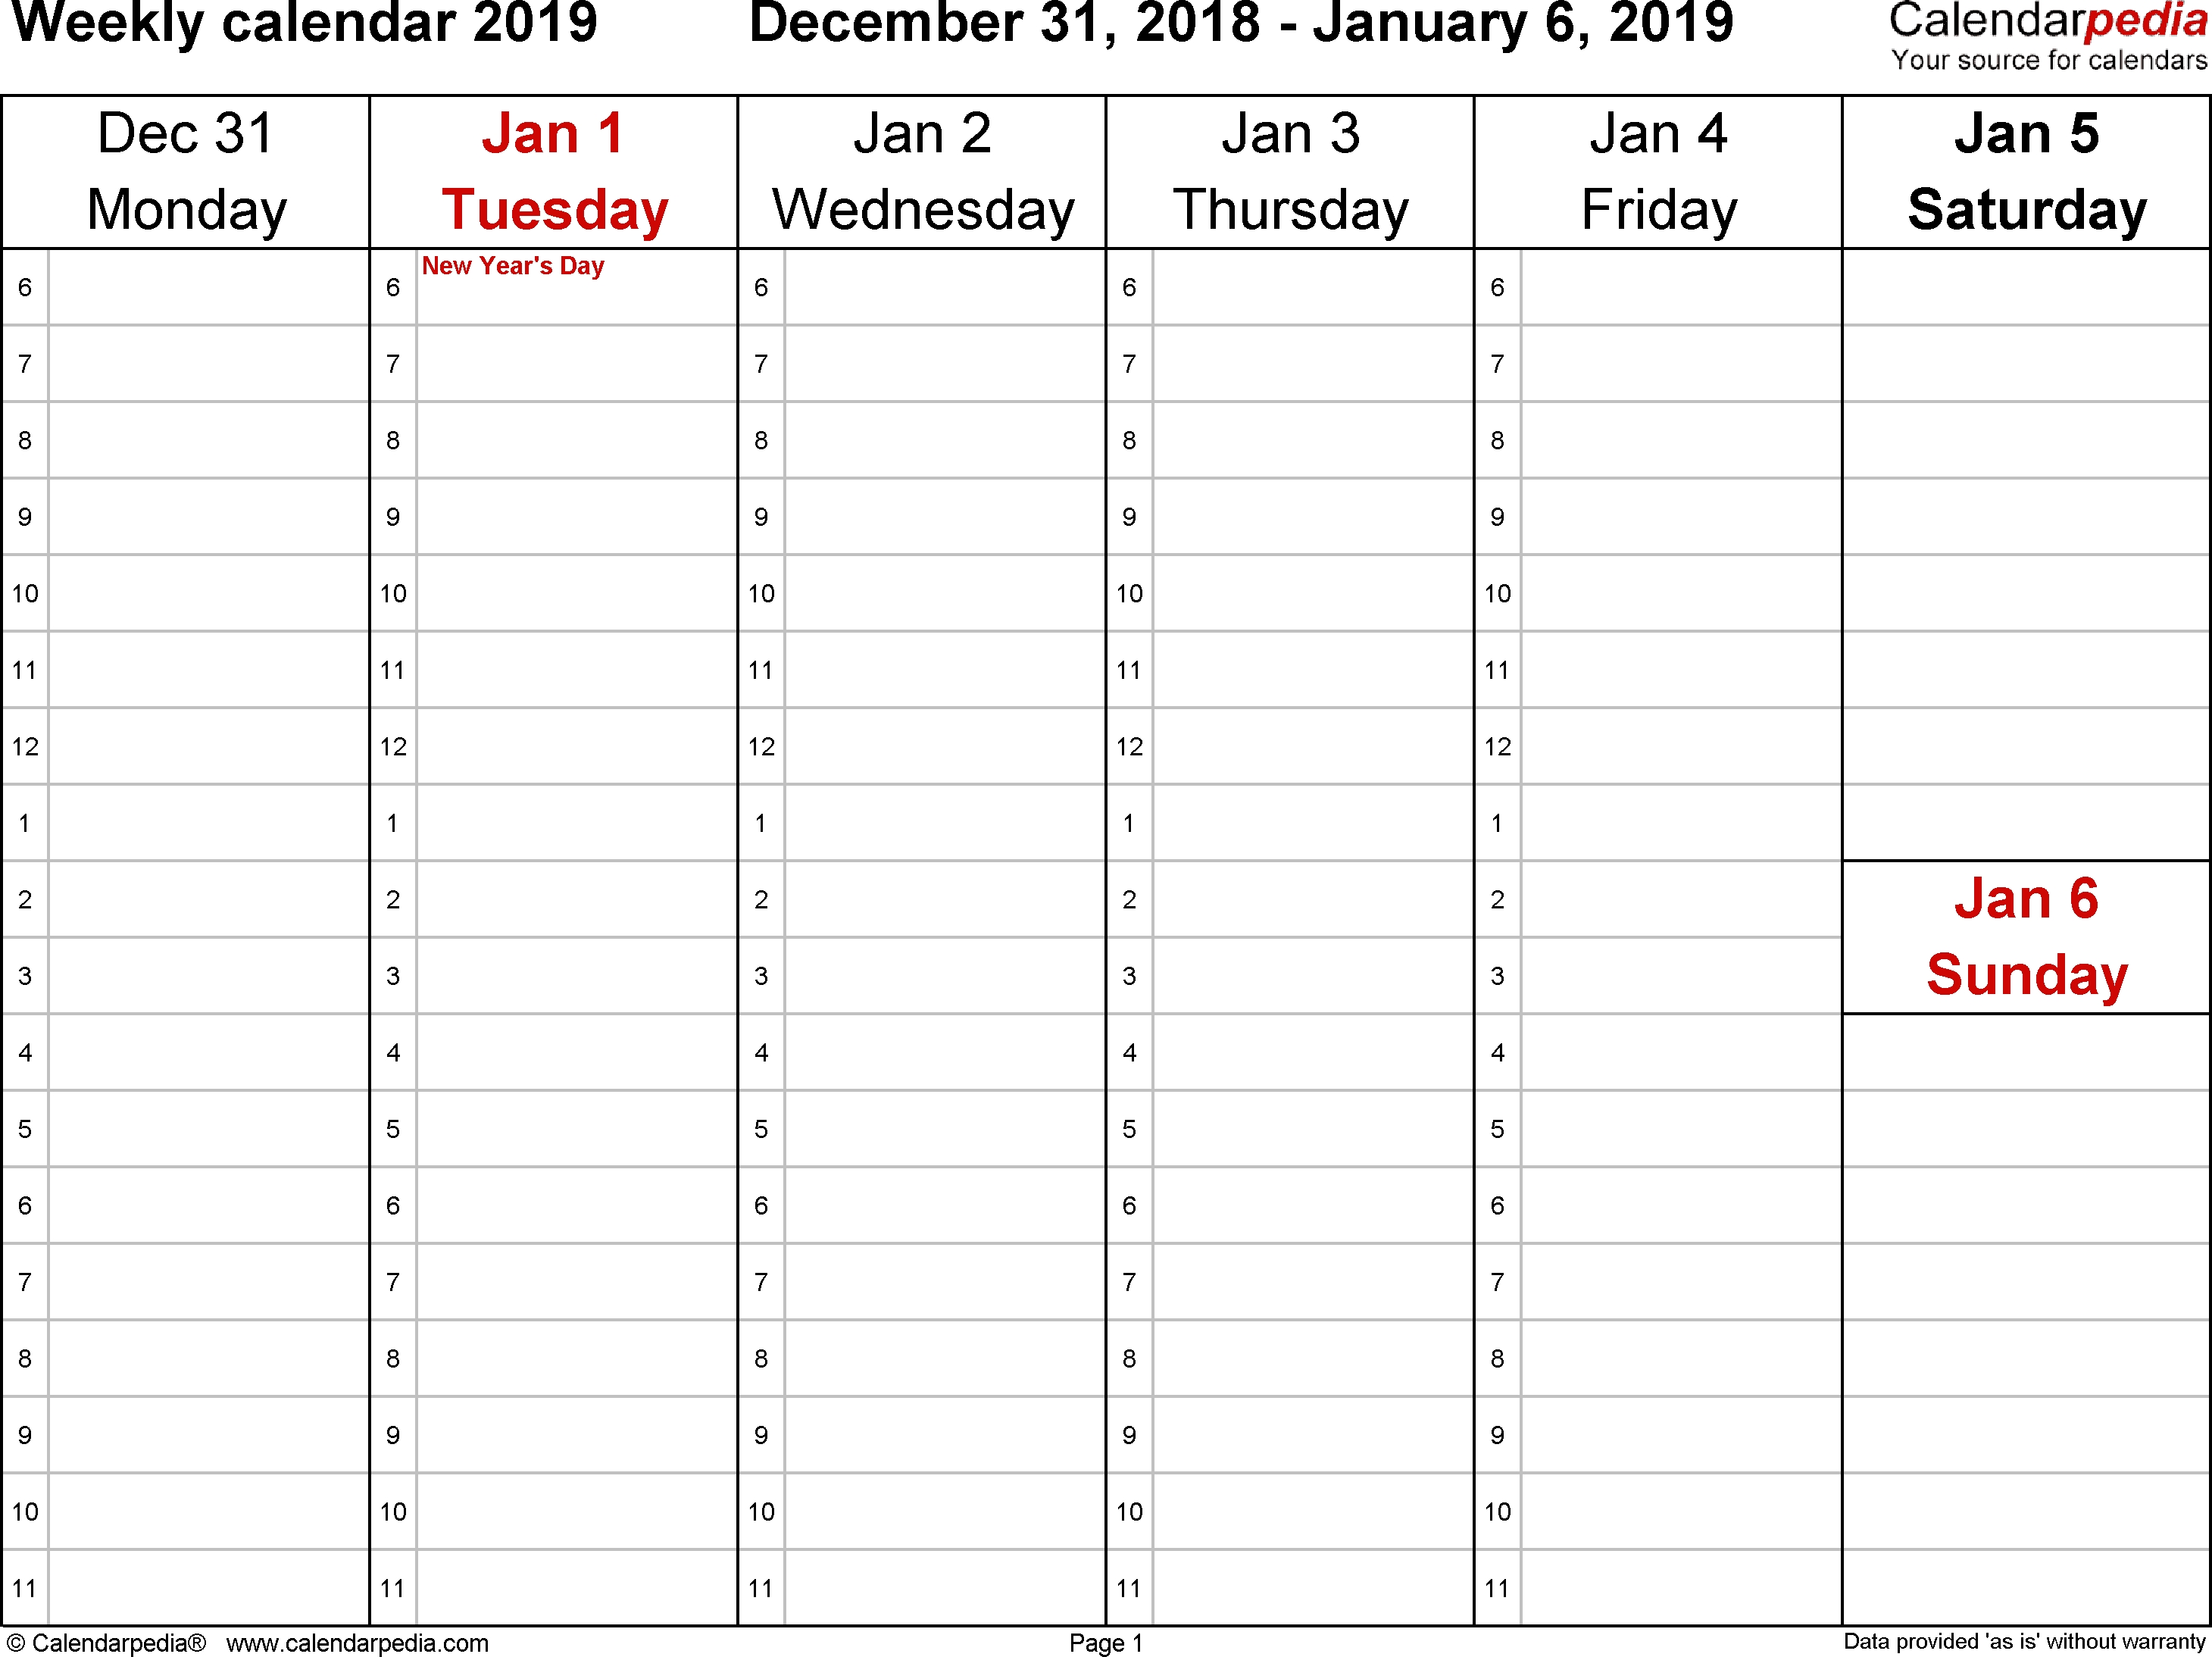 Weekly Calendars 2019 For Word - 12 Free Printable Templates intended for Monday To Friday Calendar With Hours